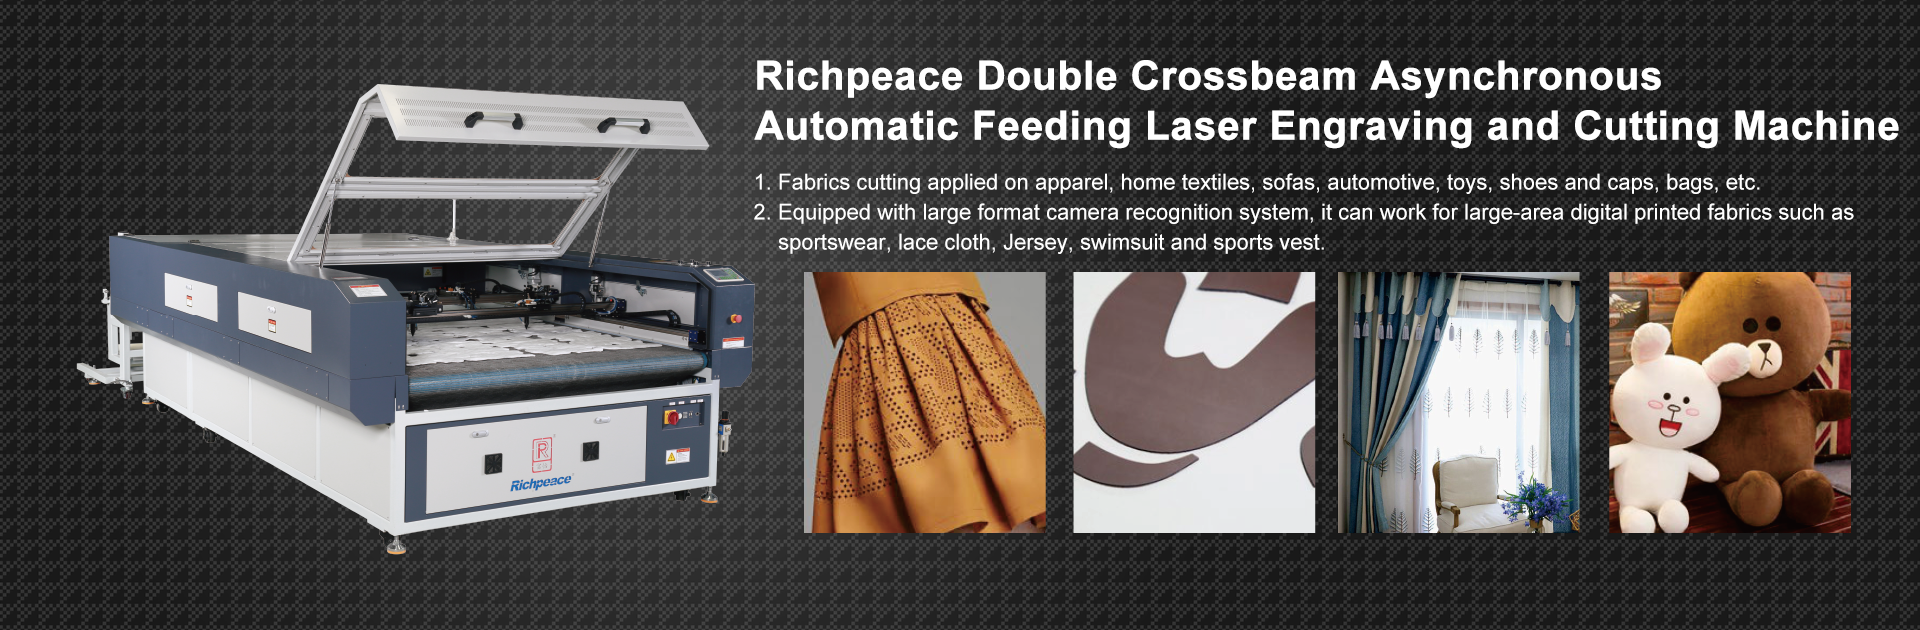 Double Beams Asynchronous Feeding Laser Engraving and Cutting Machine